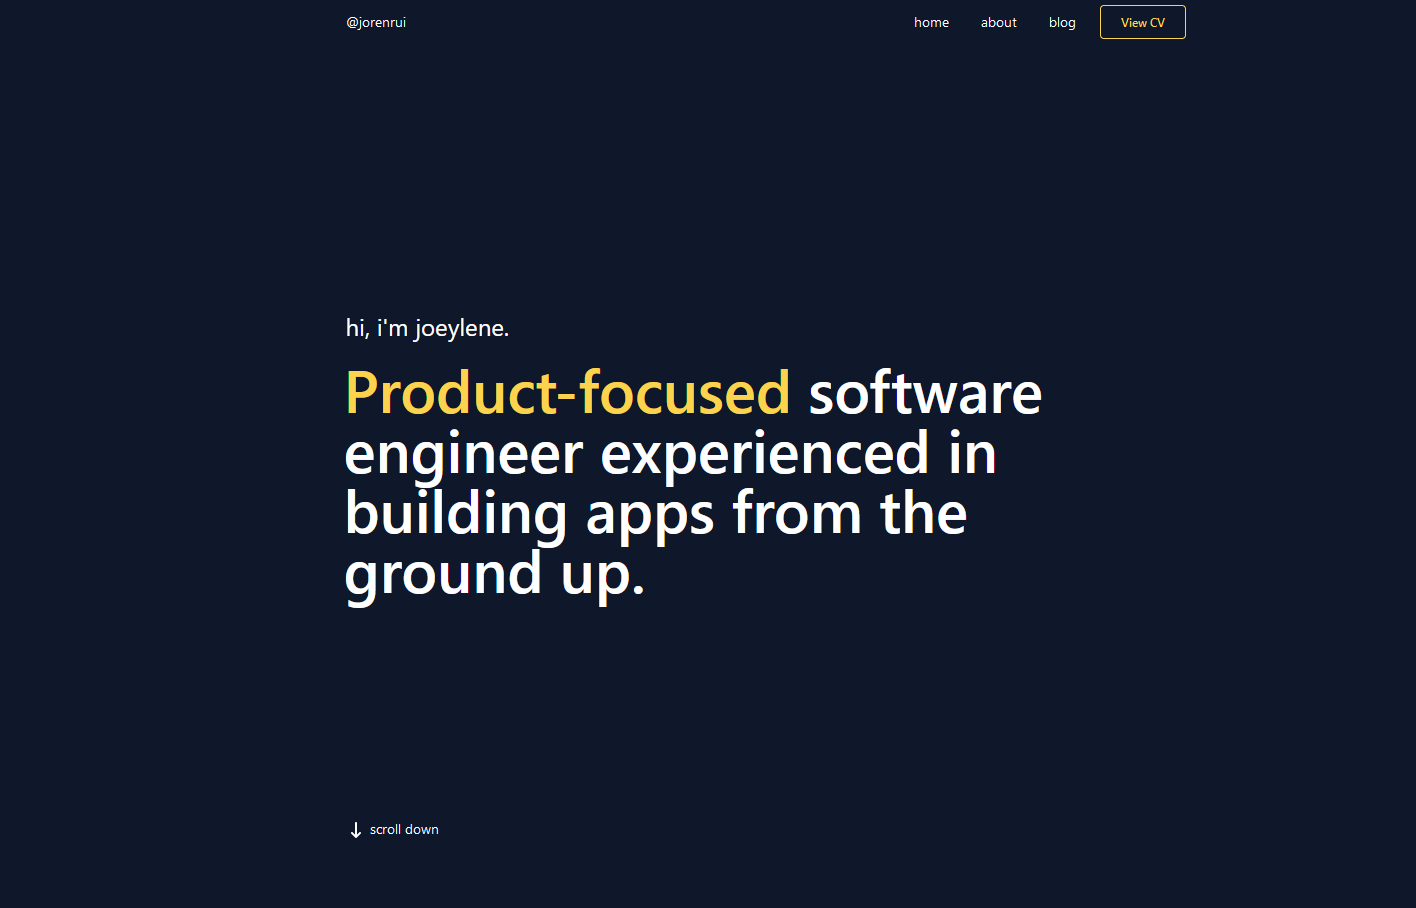 A portfolio site which has a headline of 'Hi, I'm Joeylene. Product-focused software engineer experienced in building apps from the ground up'. Its nav items are home, about, and blog. It also has a view CV button. On the left, there's a text that says @jorenrui.